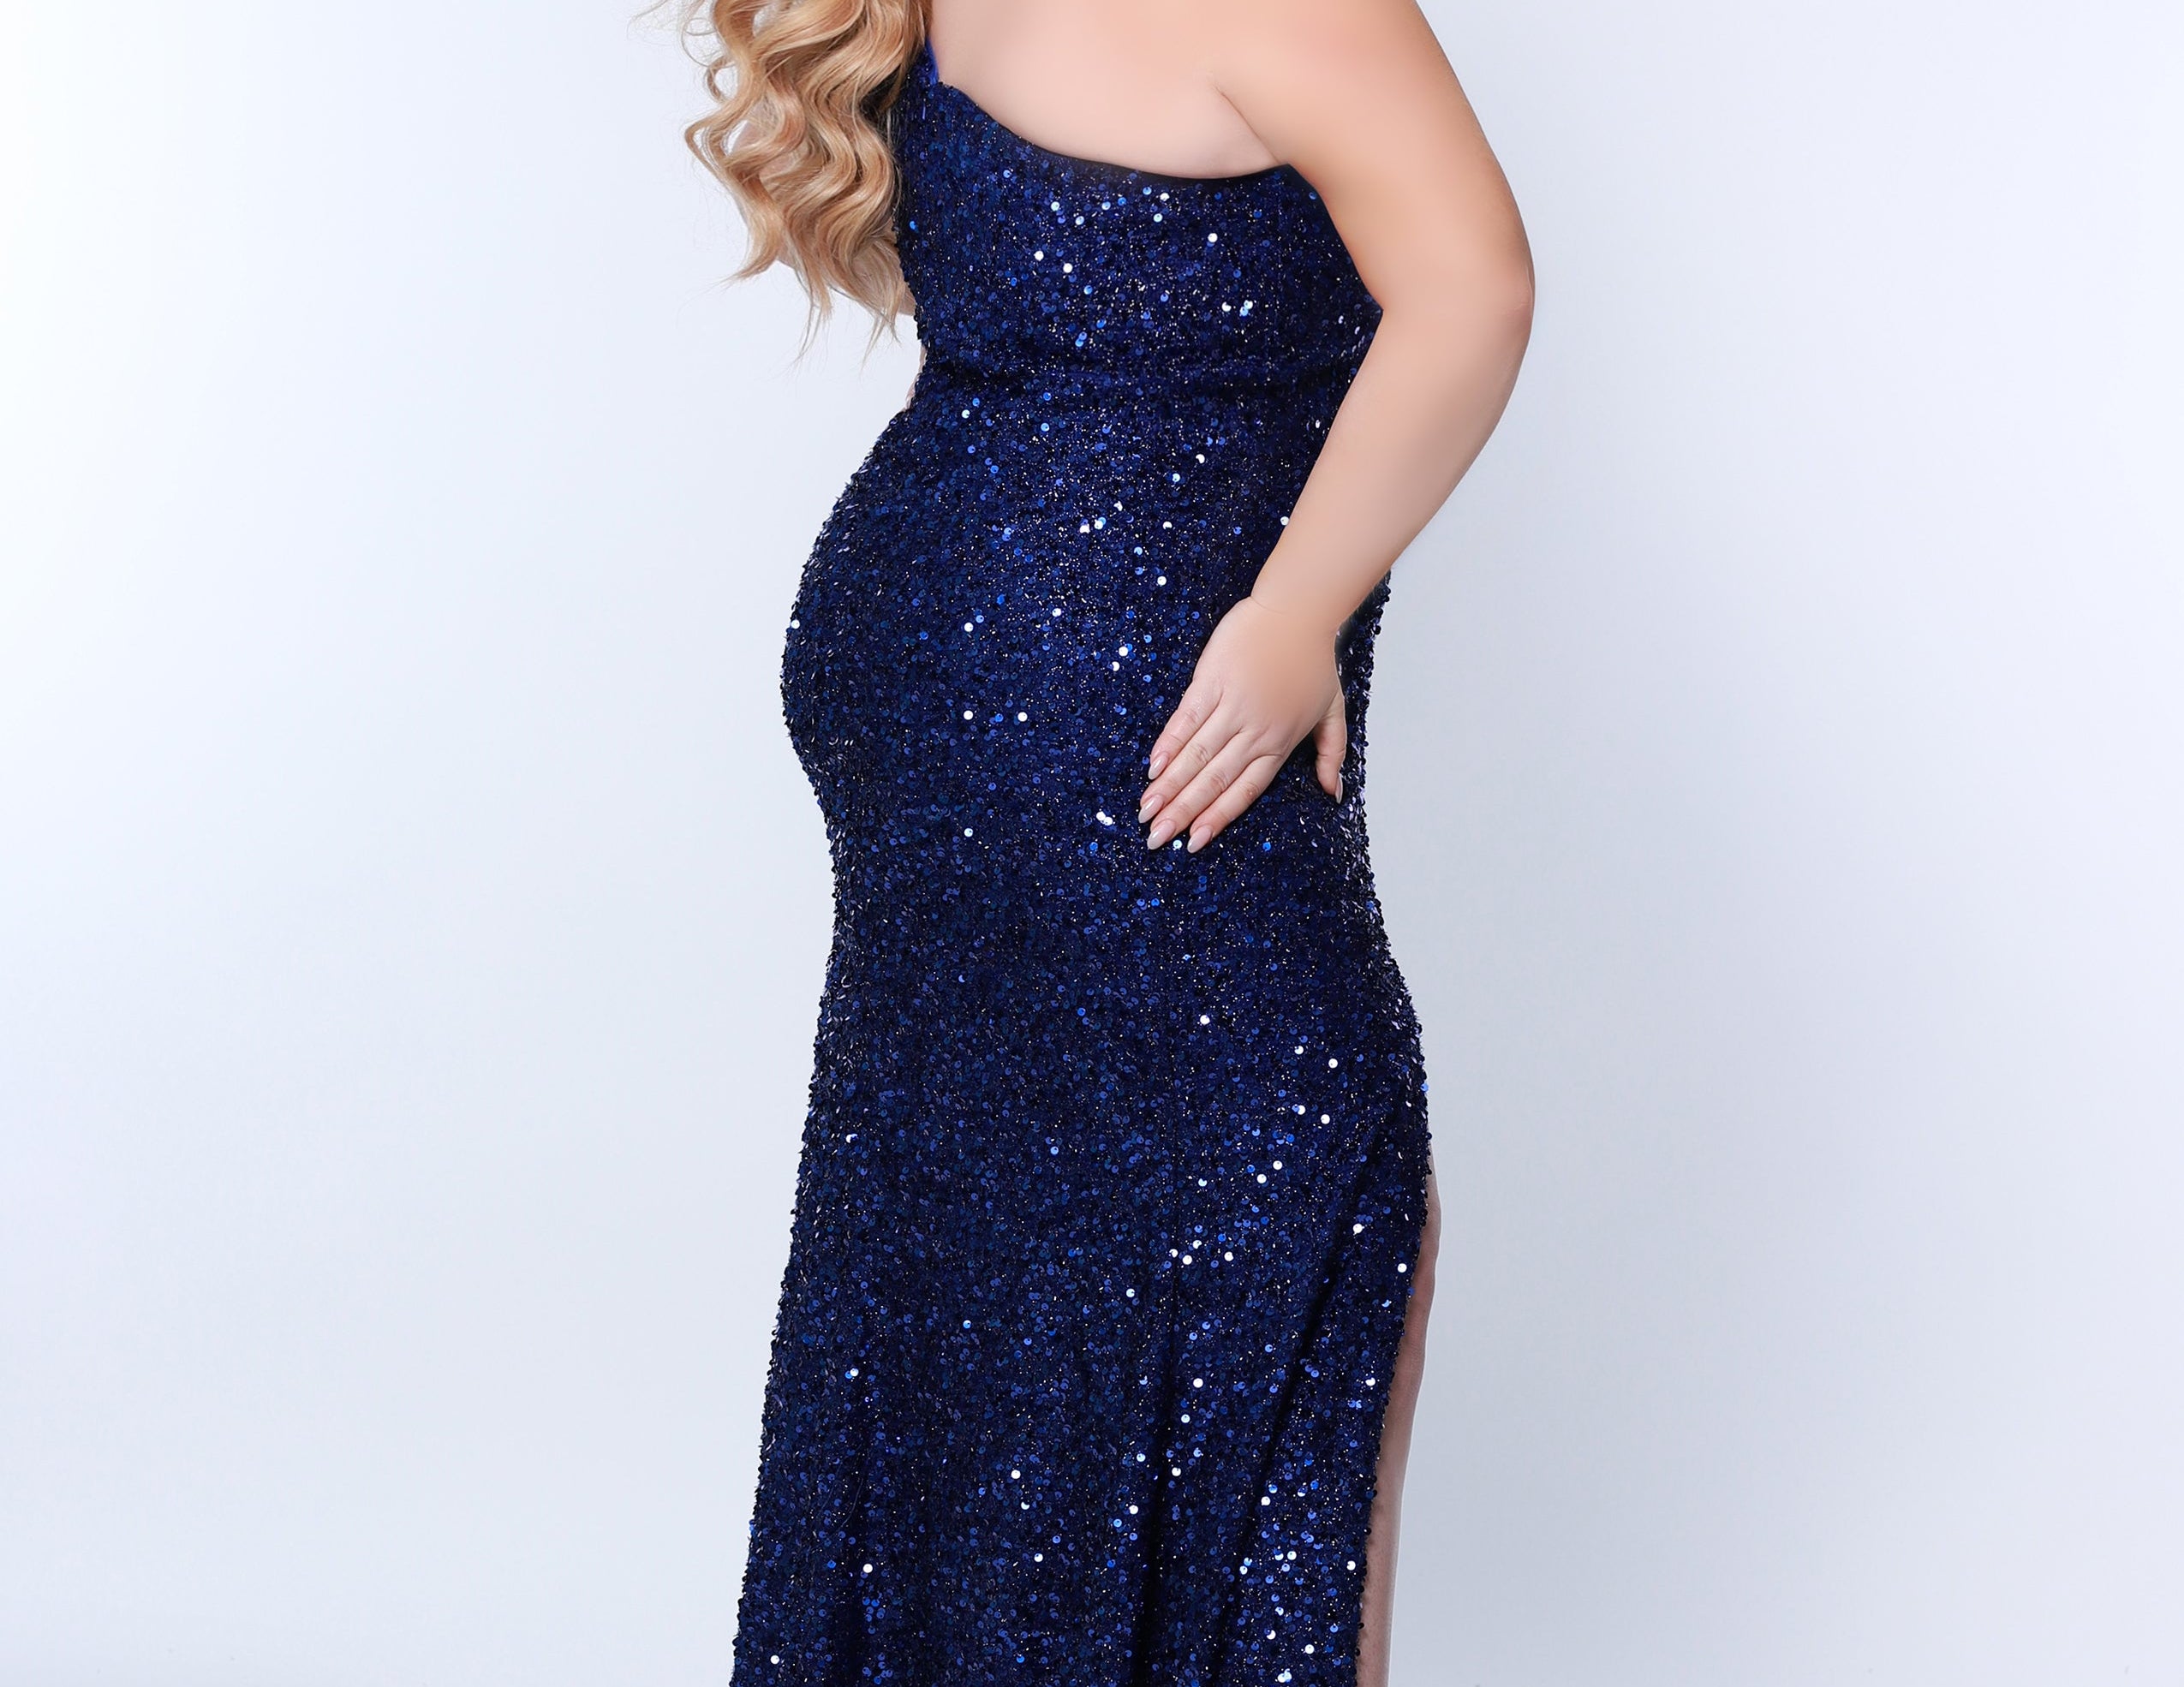 SC7360 one-shoulder plus size prom and evening gown with slit from Sydney's Closet available in red, black, sapphire blue or purple